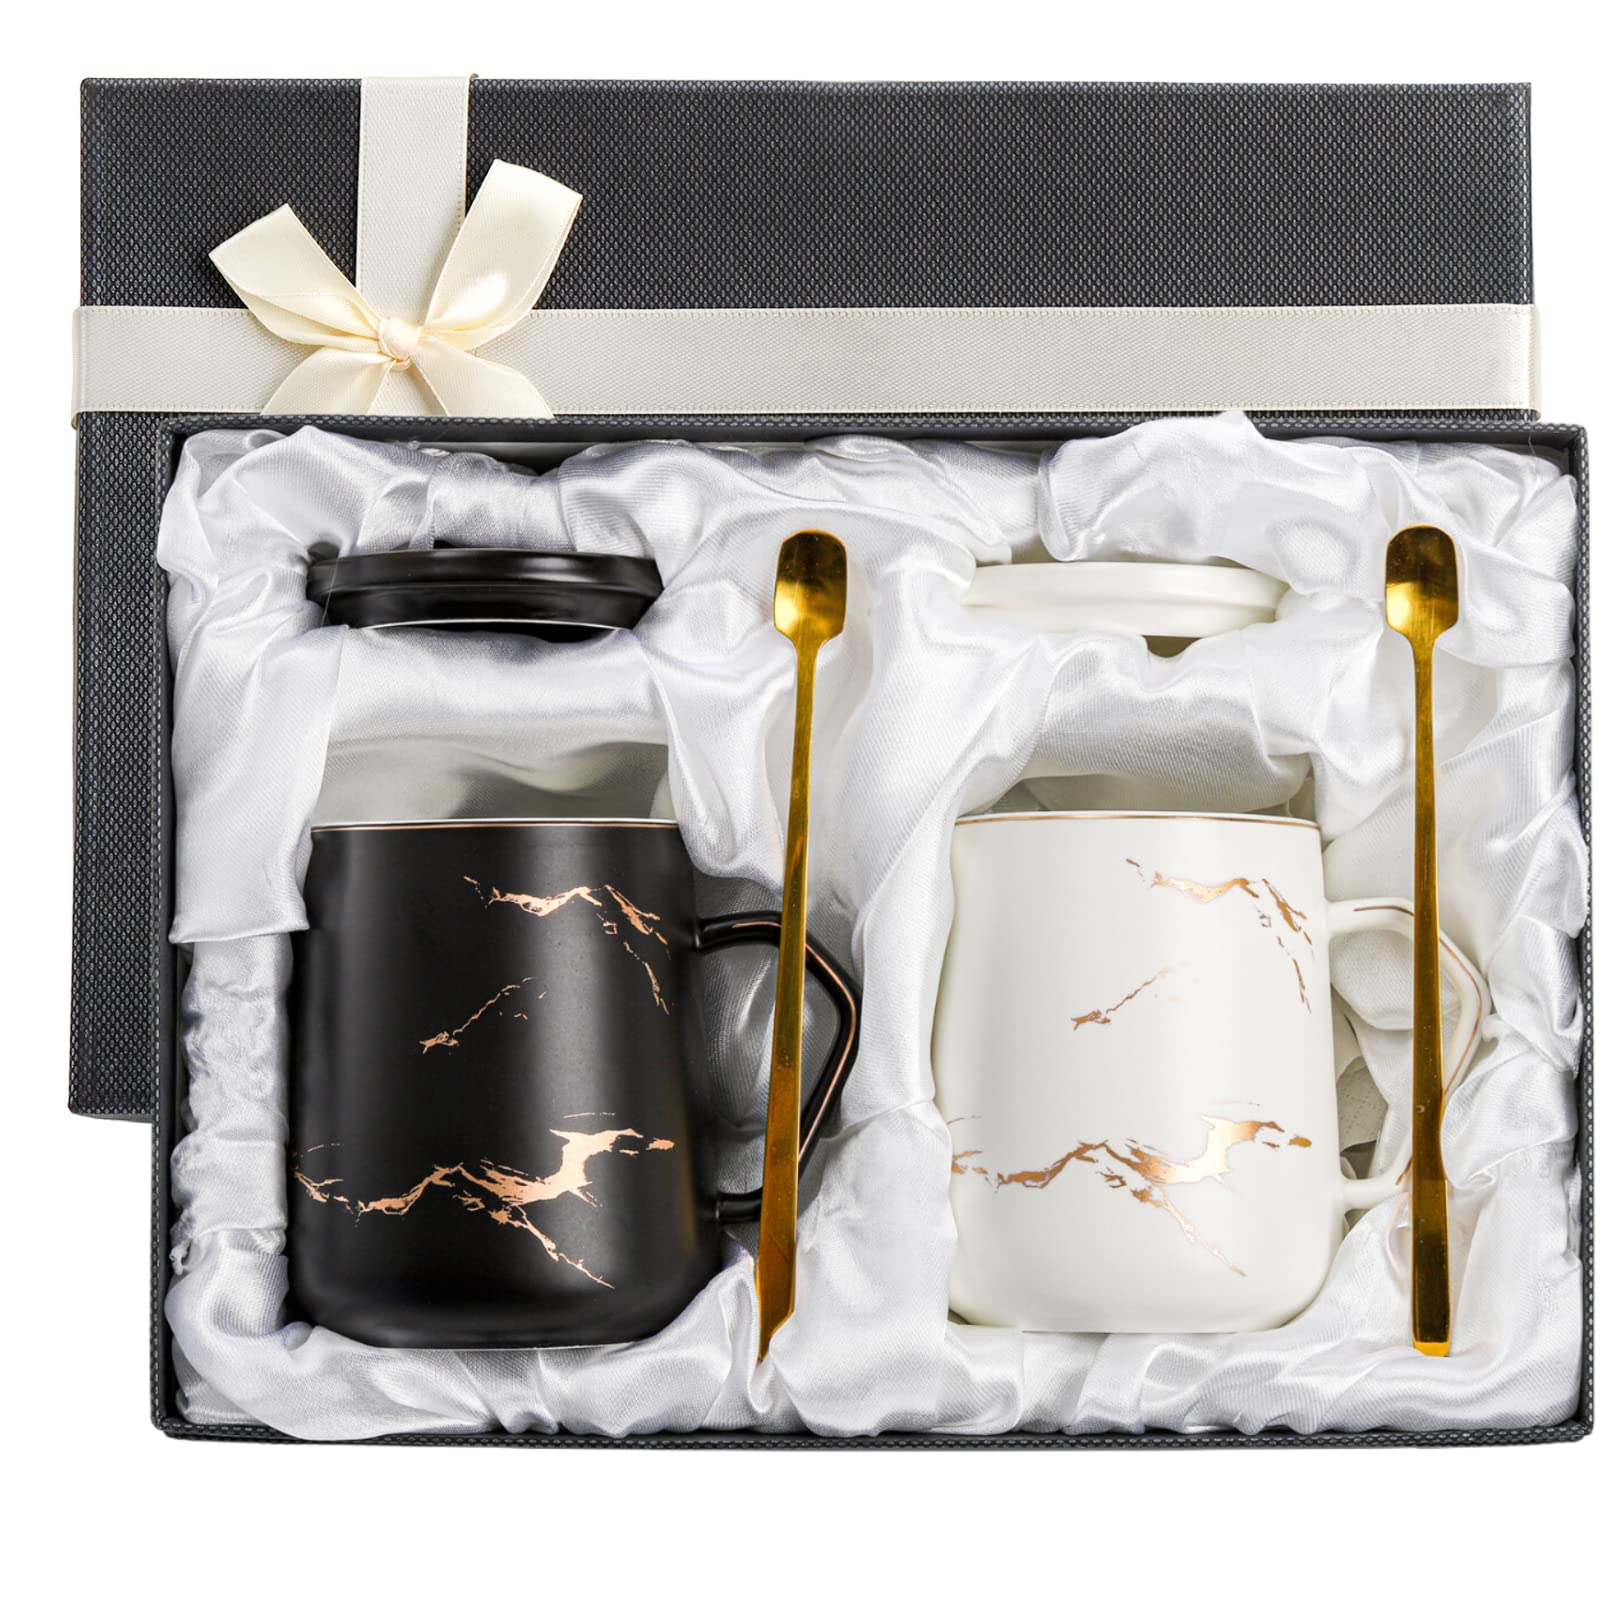 2 Pack Ceramic Coffee Mugs with Gift Box, 13.5 Oz Porcelain Mugs Set with Lid and Gold Spoon, Luxurious Marbling Black and White Couple Mugs Gift for Males Ladies, Tea, Milk, Workplace and Dwelling.